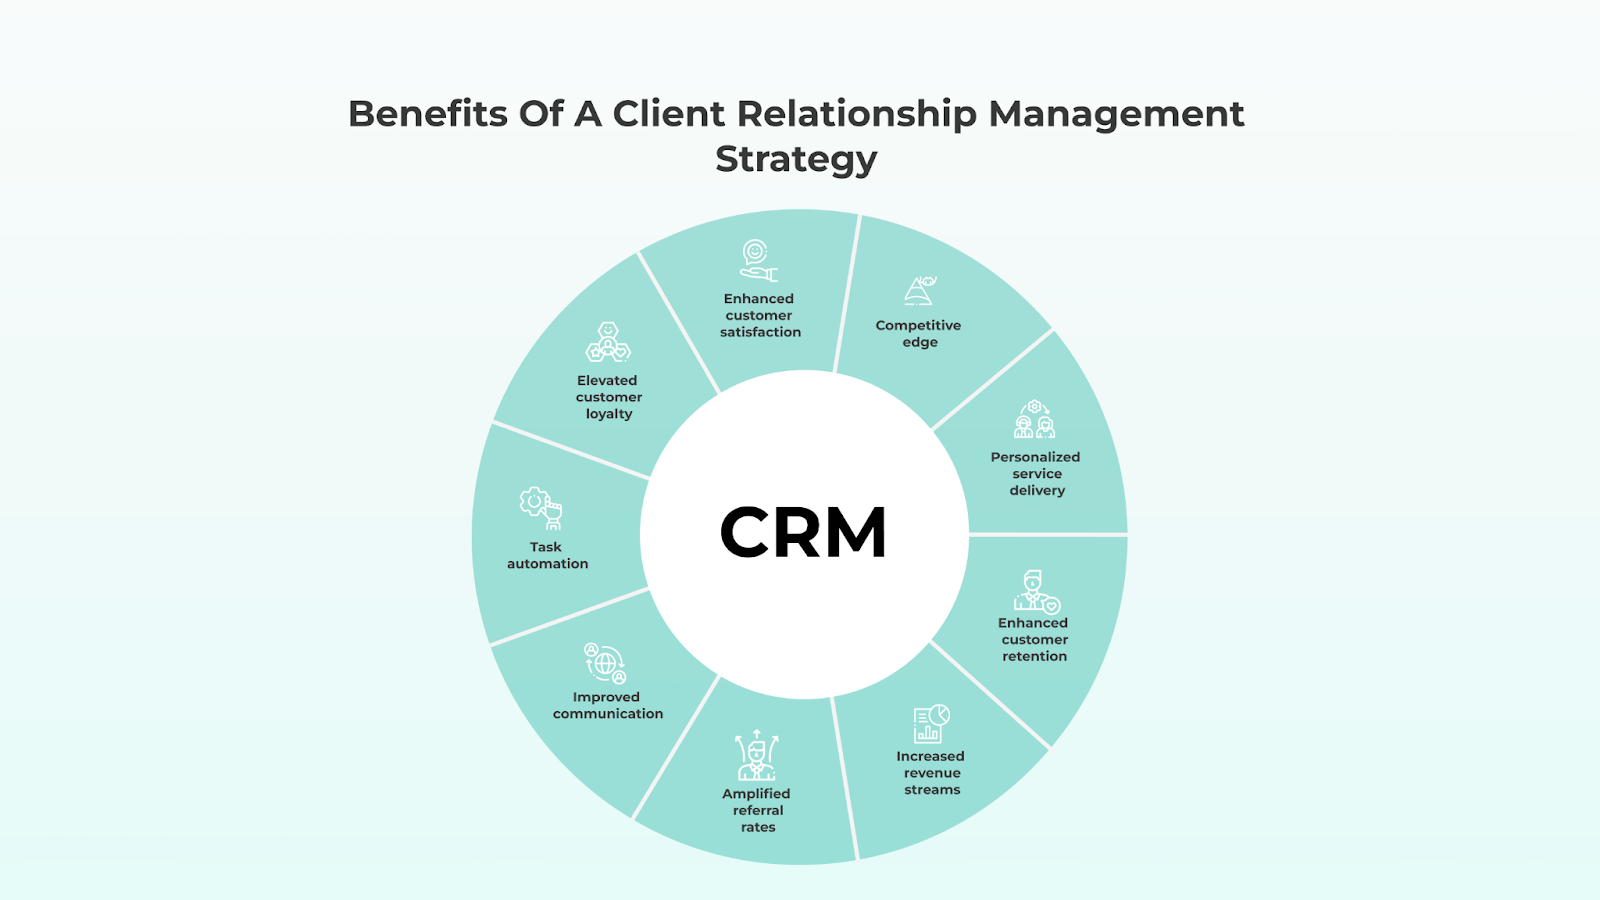 Benefits of a Client Relationship Management Strategy